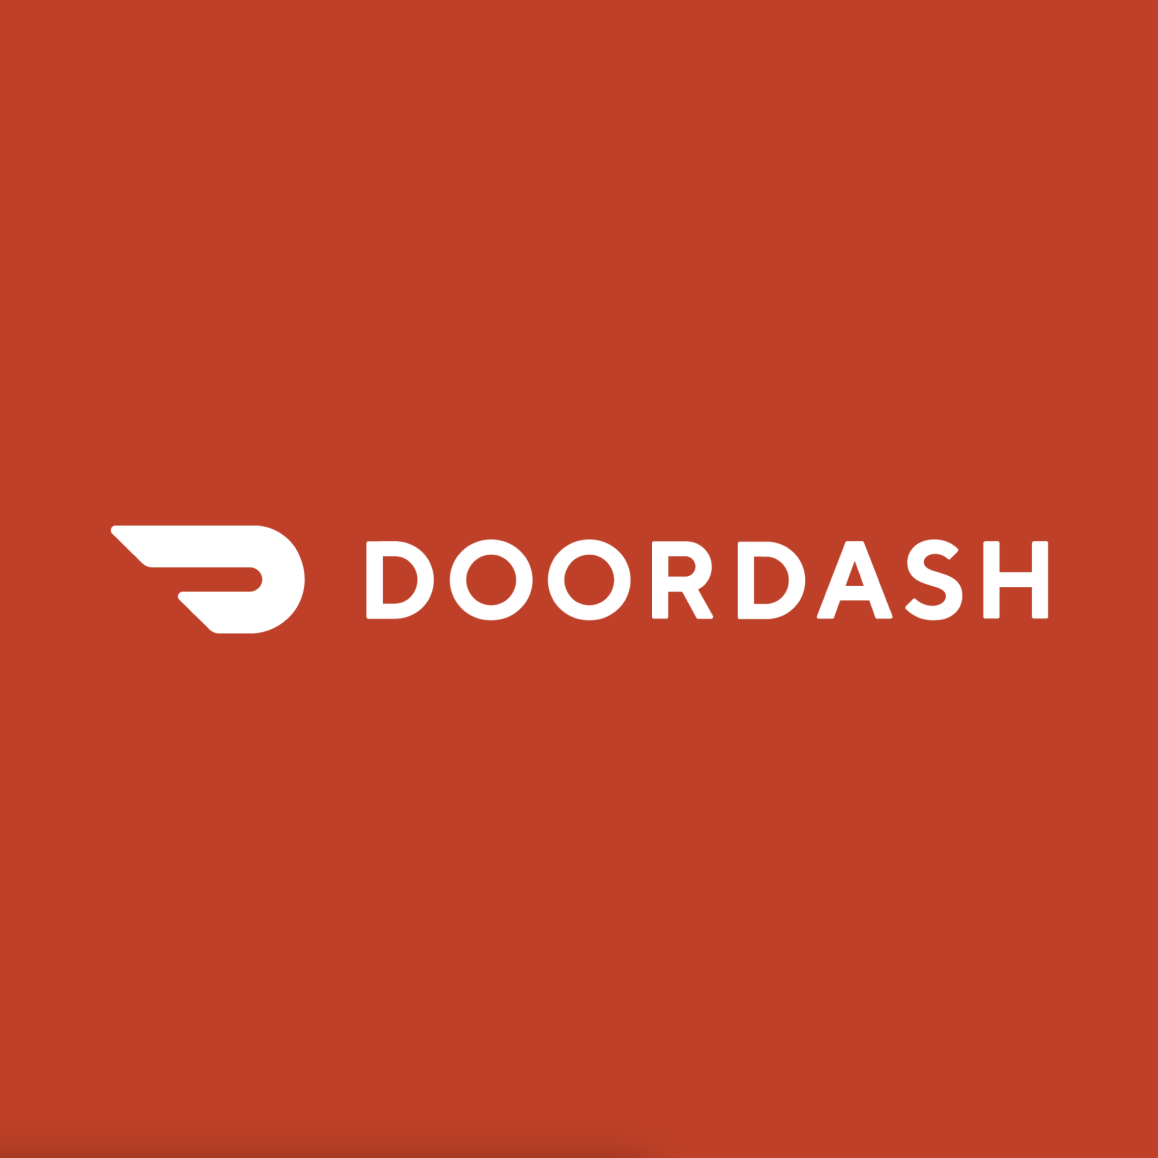 Sign up for DoorDash without a phone number cover image